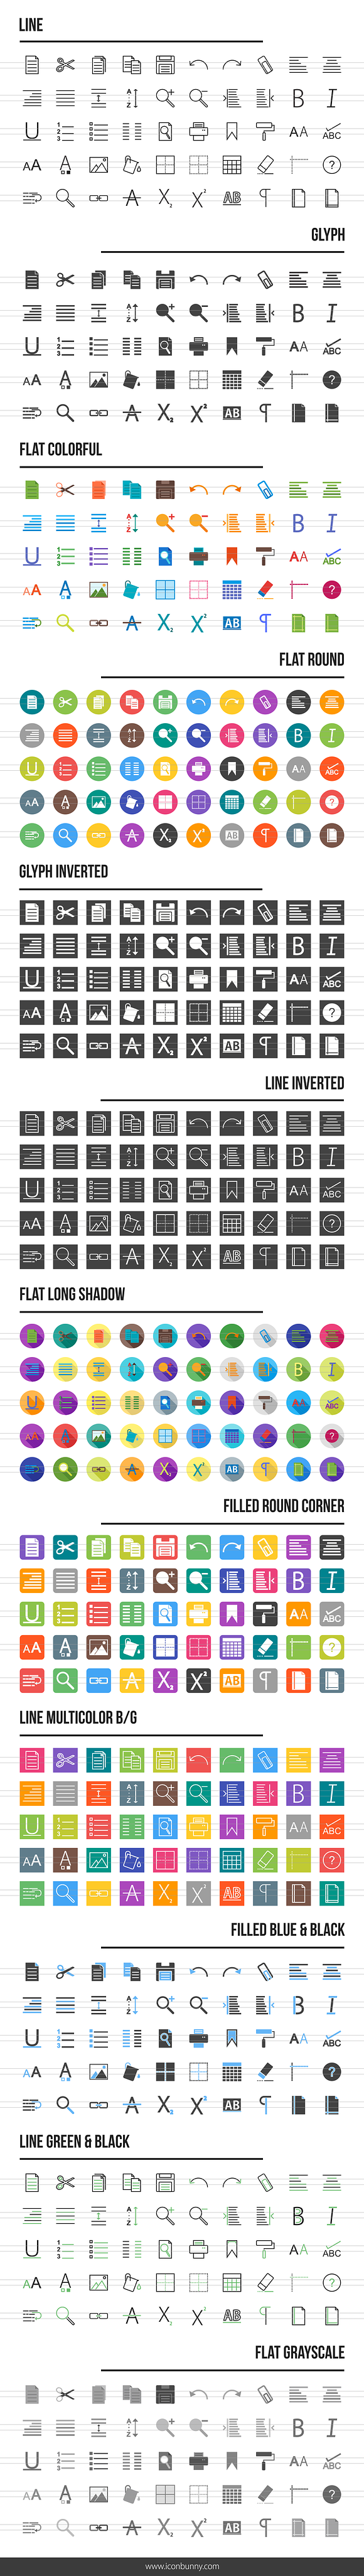 600 Text Editing Icons in Graphics - product preview 1